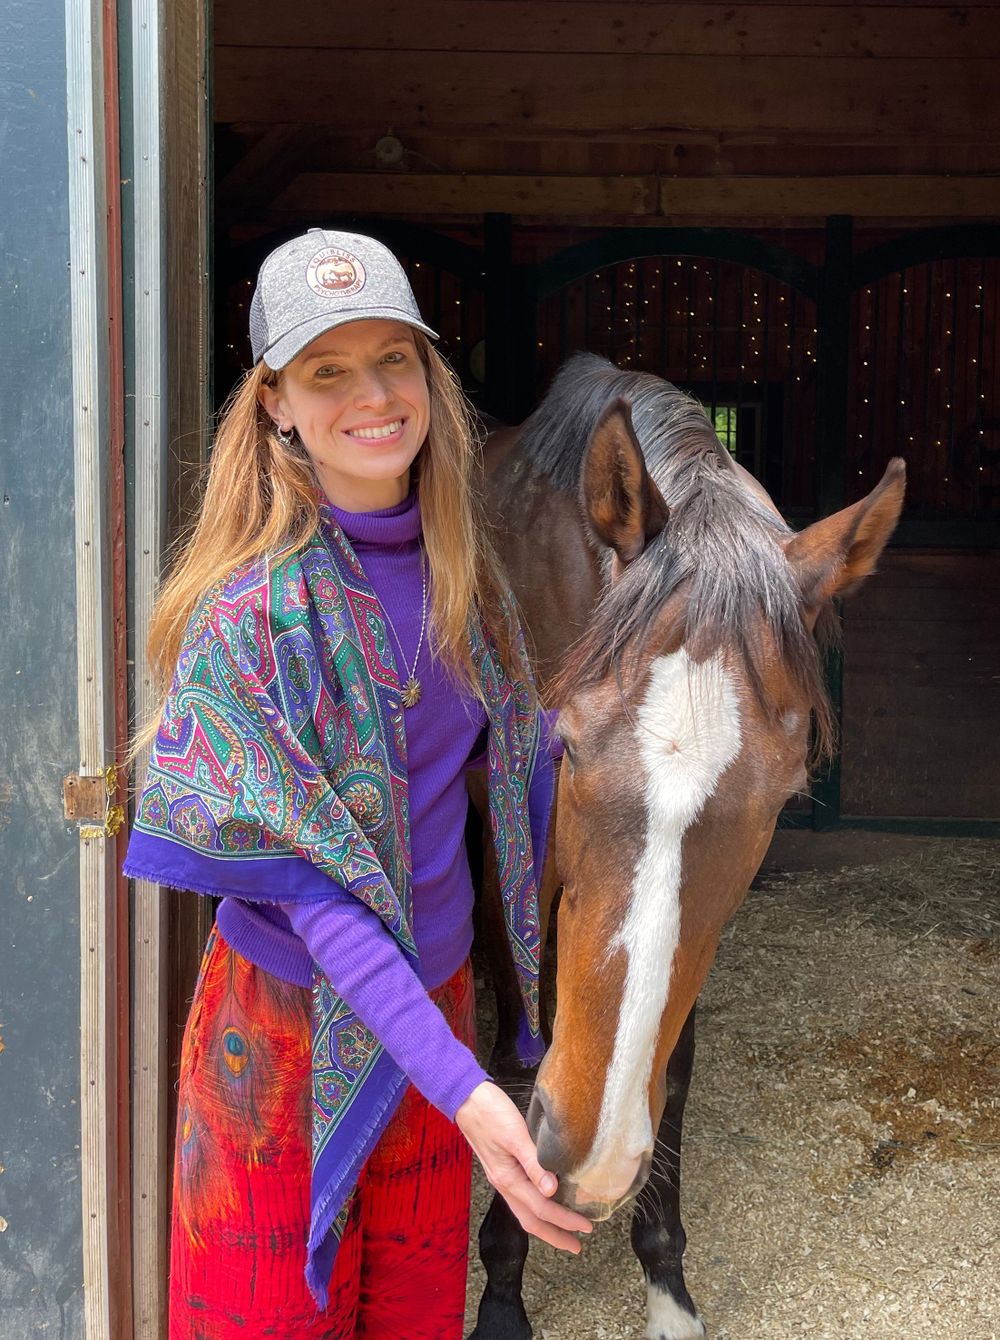 If you've been struggling to feel present in your life or to address chronic issues Equine Assisted therapy can provide you with tools to heal & grow.